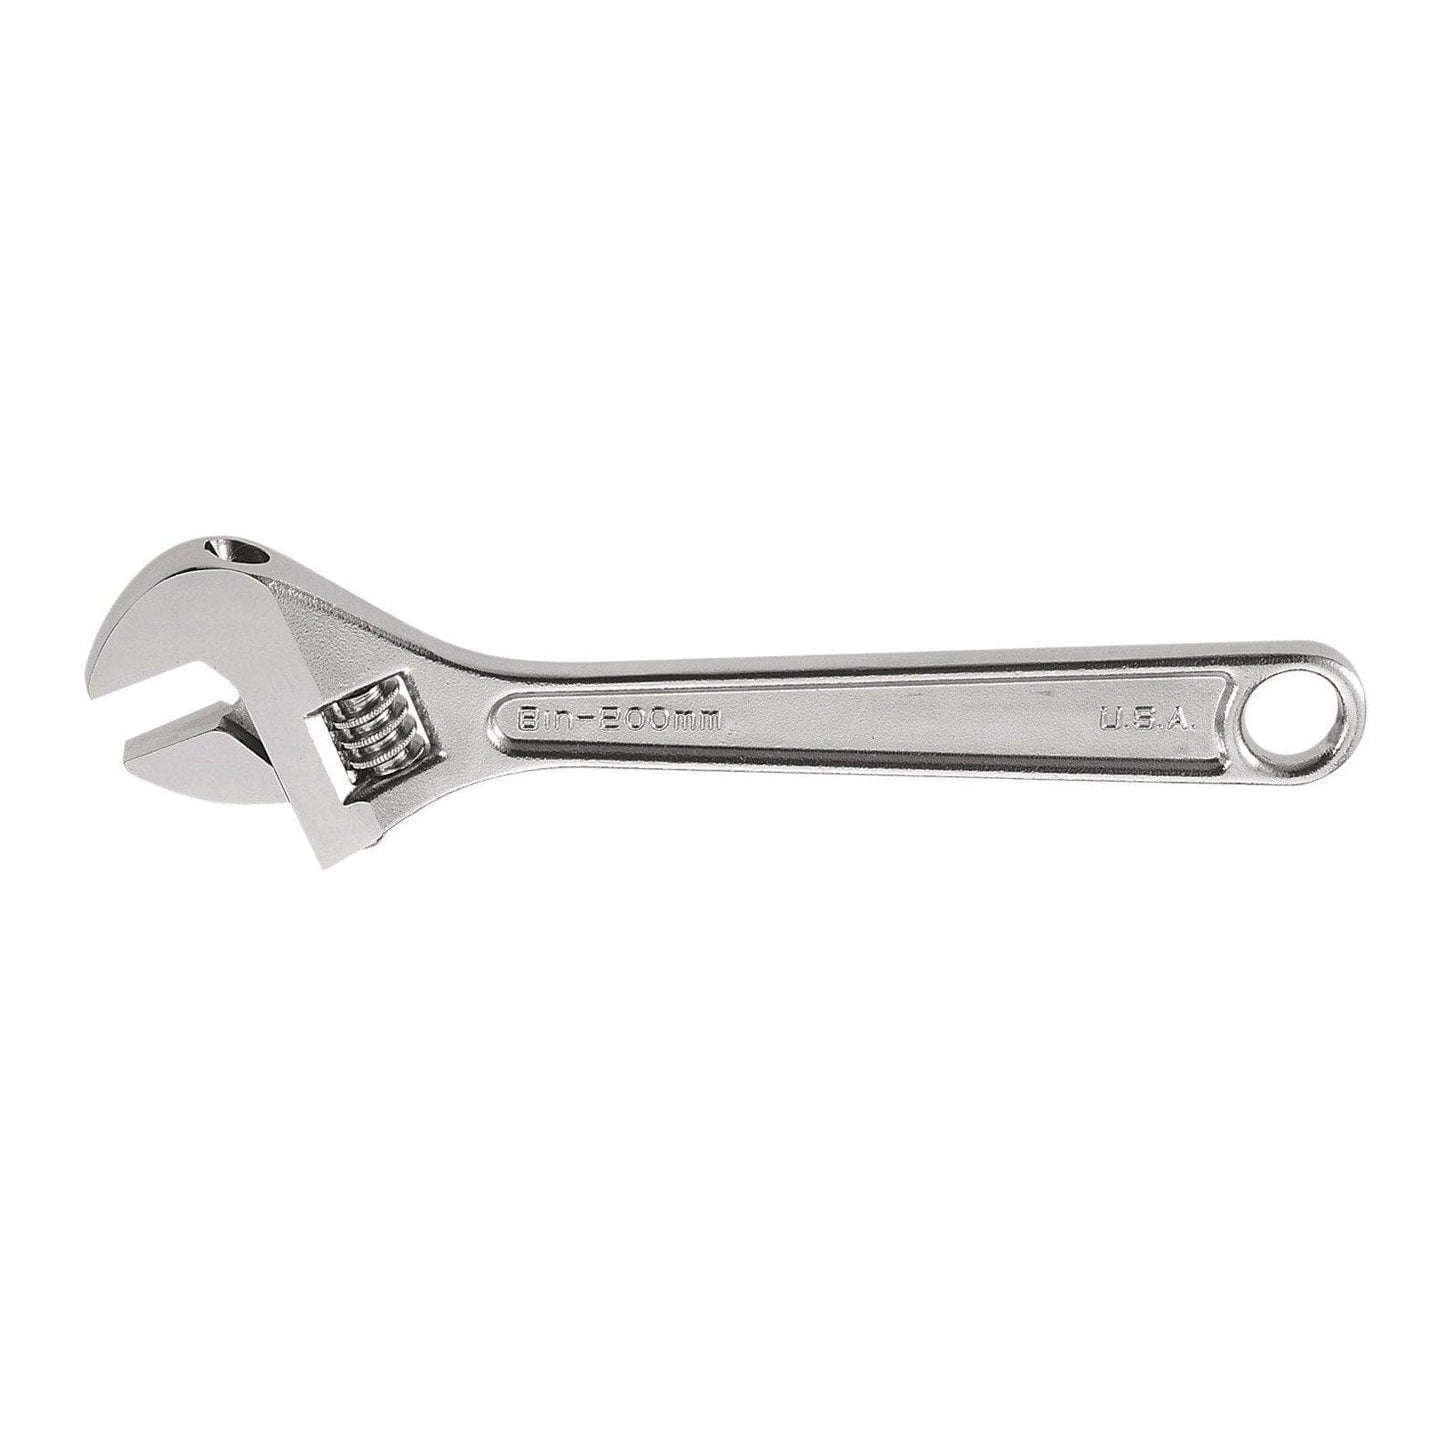 Klein 15'' Adjustable Wrench Standard Capacity - 506-15 Wrenches Klein Tools 